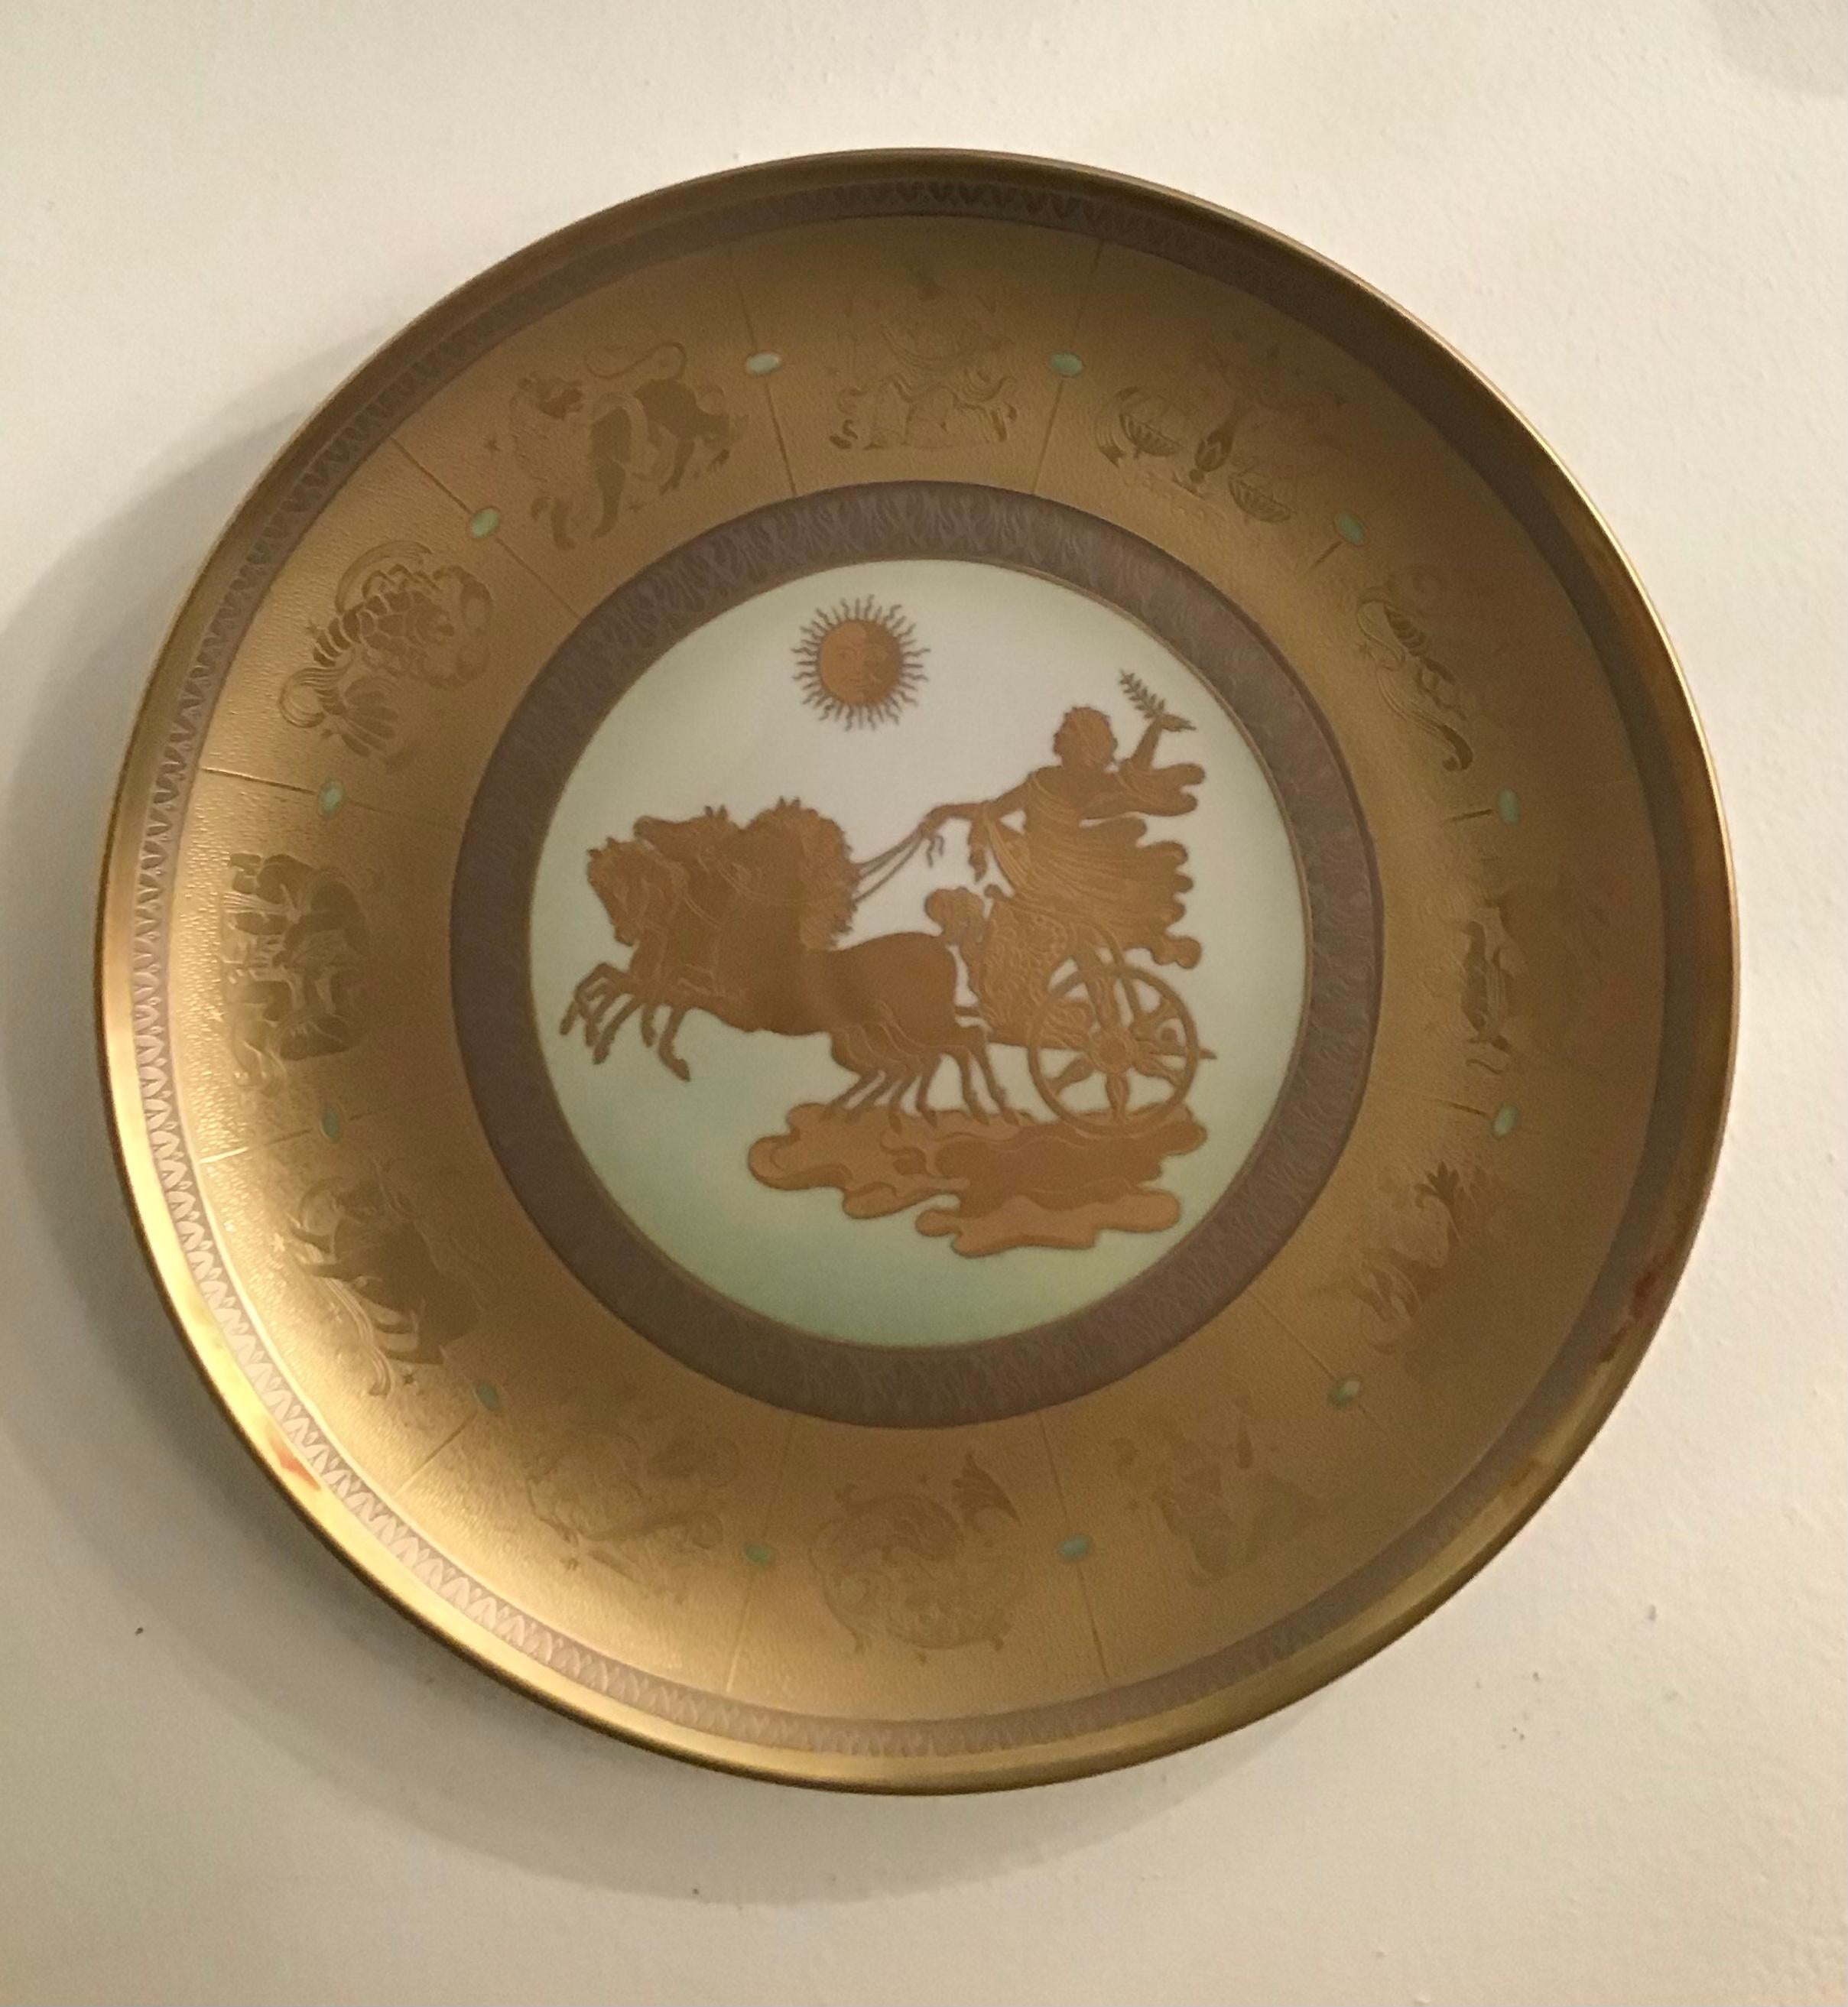 Morbelli “Il Giorno“ Porcelain Wall Plate Pure Gold, 1960, Italy For Sale 4